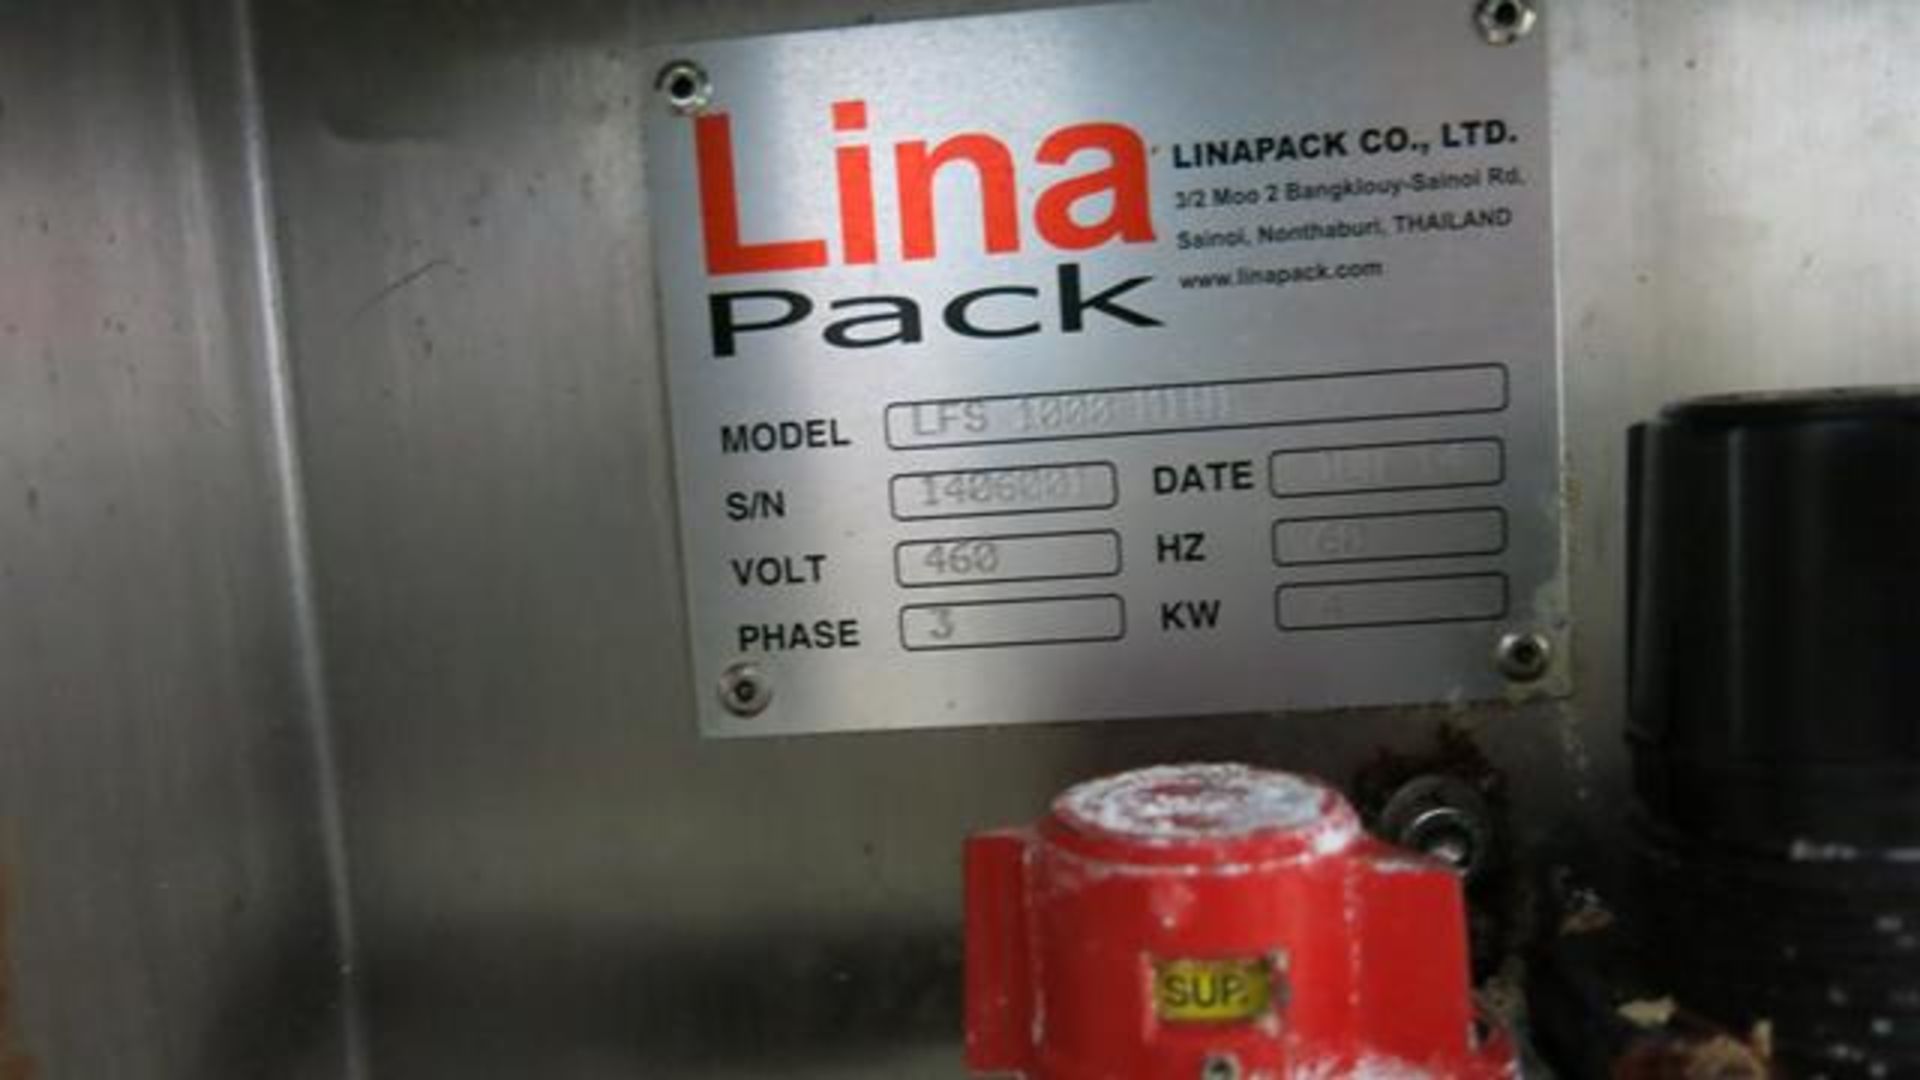 LINAPACK, LFS-1000 MINI, STAINLESS STEEL, STAND-UP POUCH, FILL AND SEAL MACHINE, POUCH INFEED - Image 18 of 22